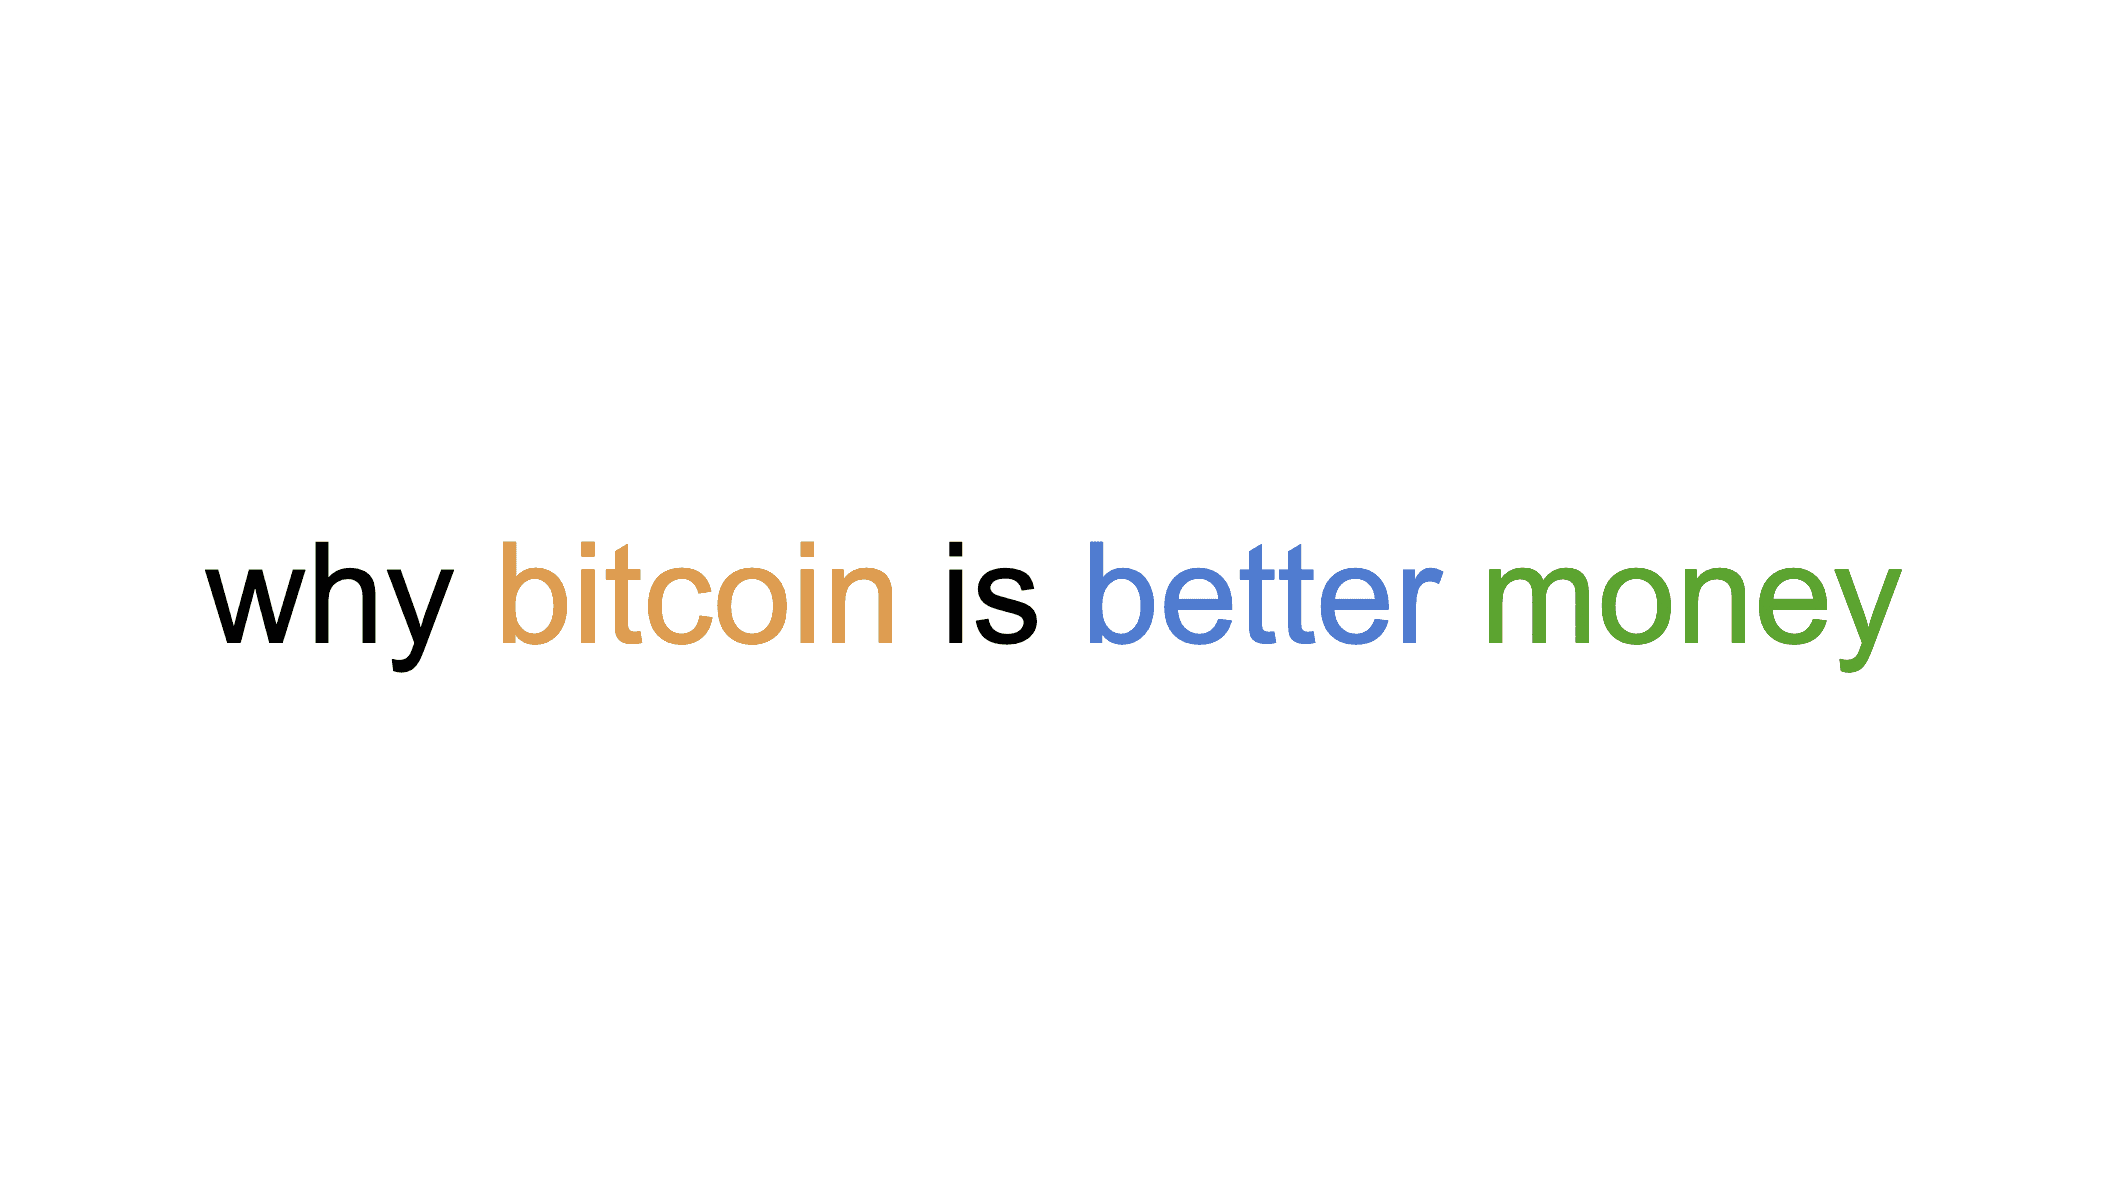 Why Bitcoin is Better Money